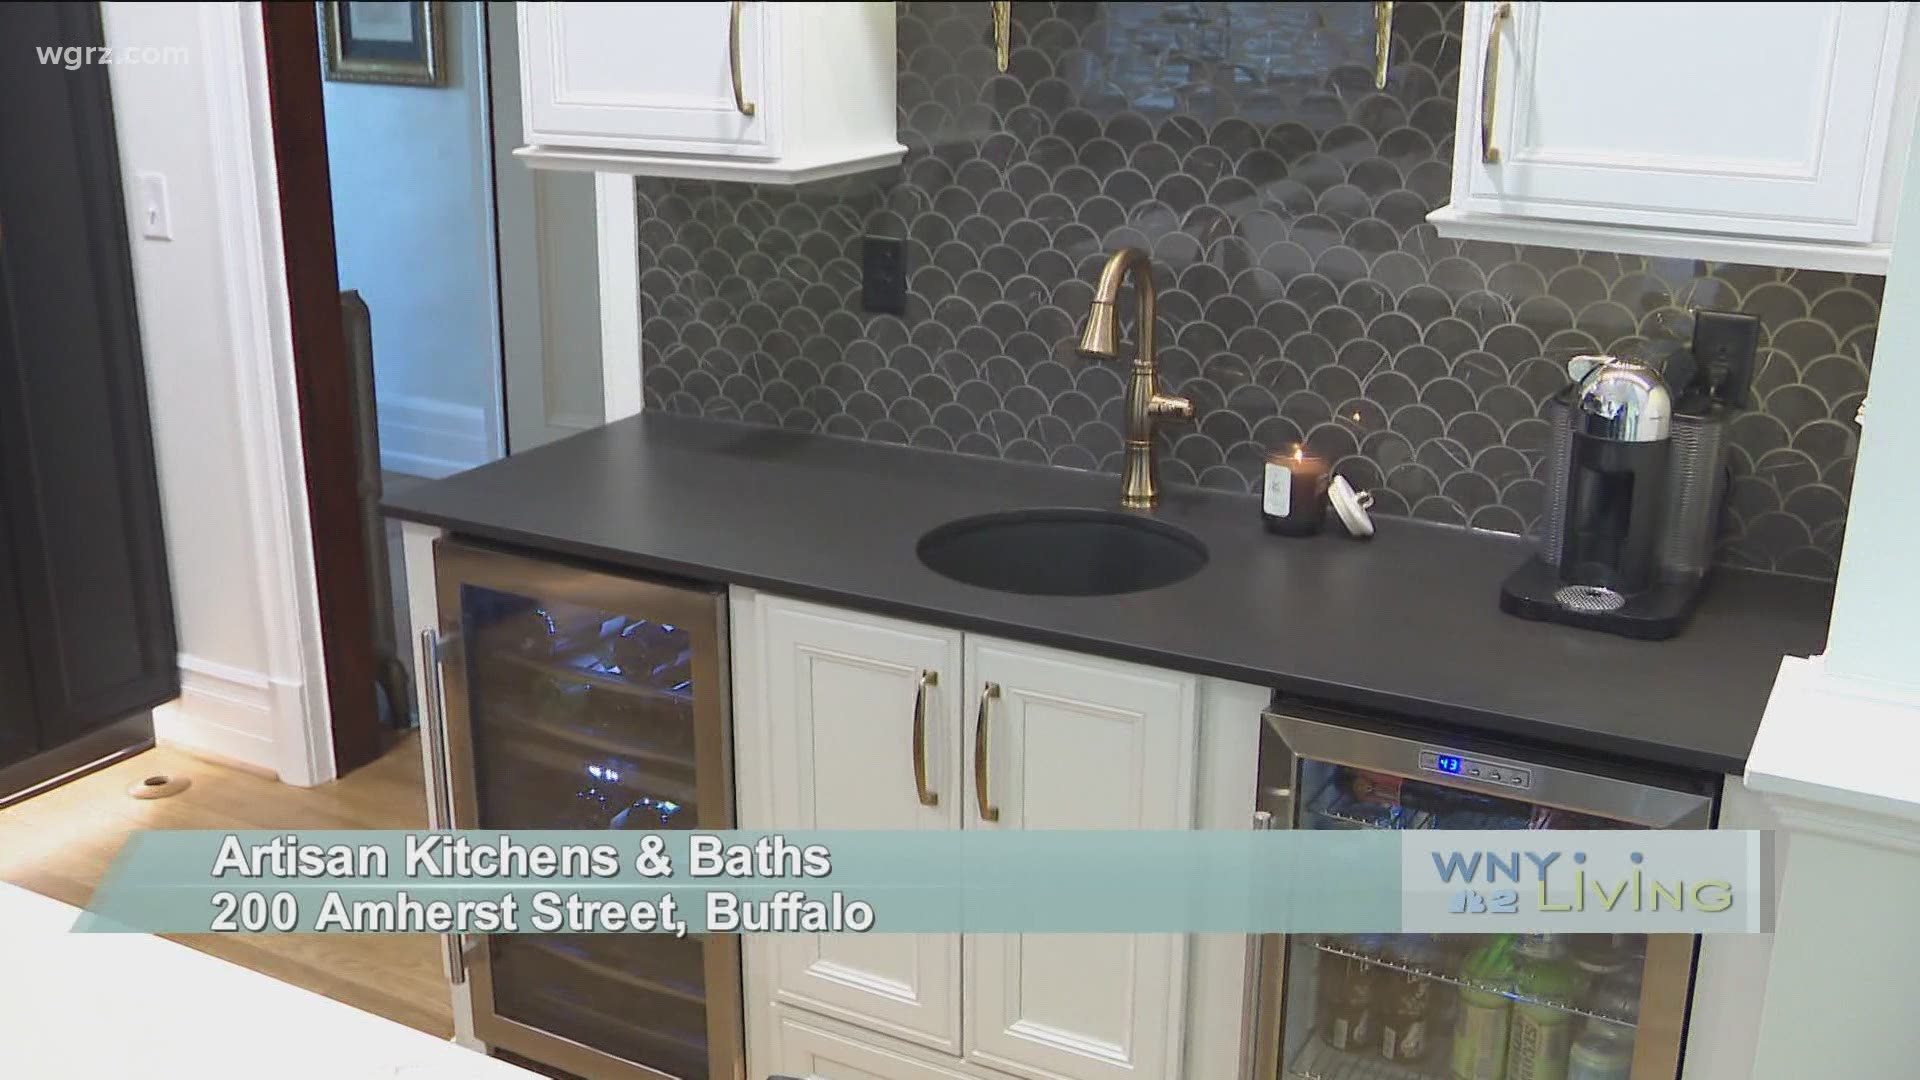 October 31 - Artisan Kitchens & Baths (THIS VIDEO IS SPONSORED BY ARTISAN KITCHENS & BATHS)